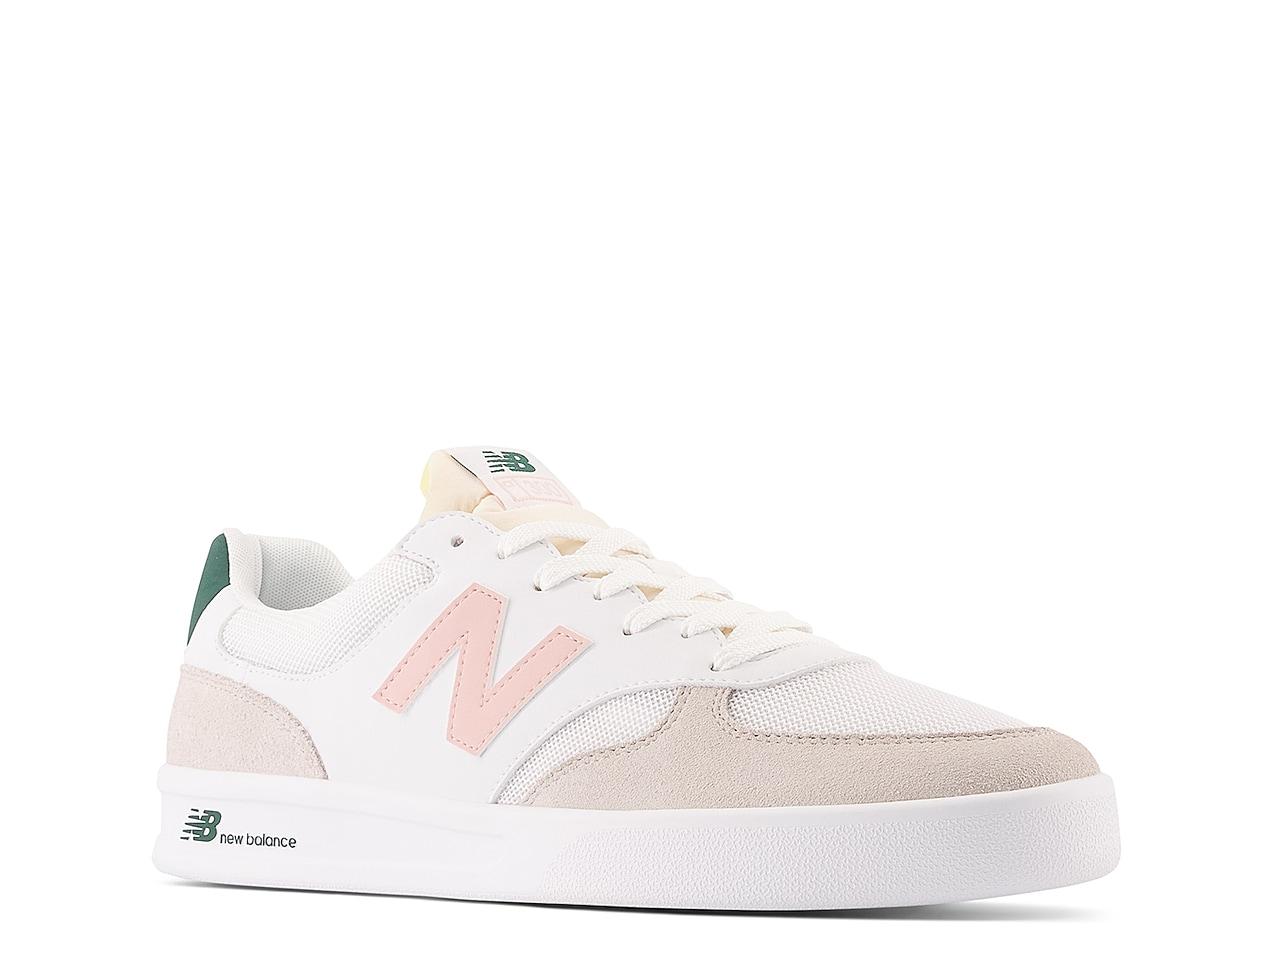 Bloedbad Beg lied New Balance 300 V3 Sneaker in White | Lyst